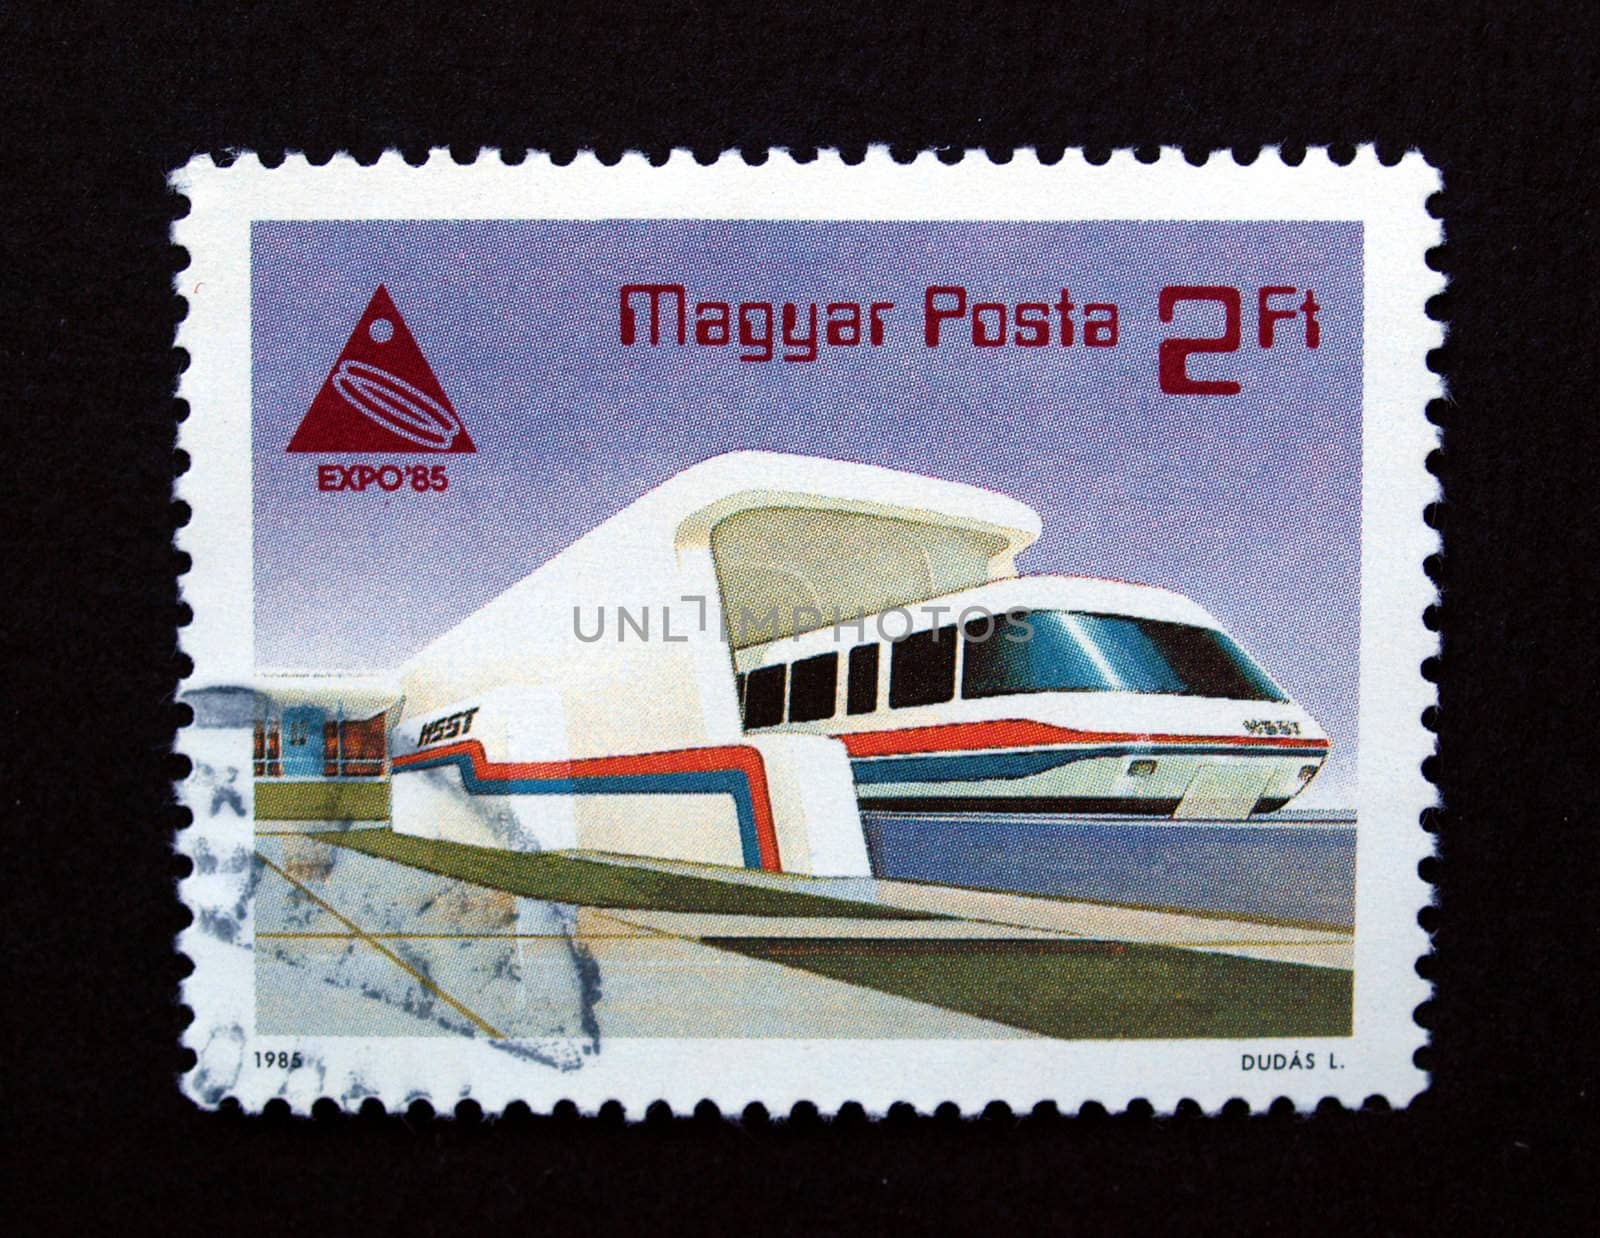 Hungary stamp by paolo77